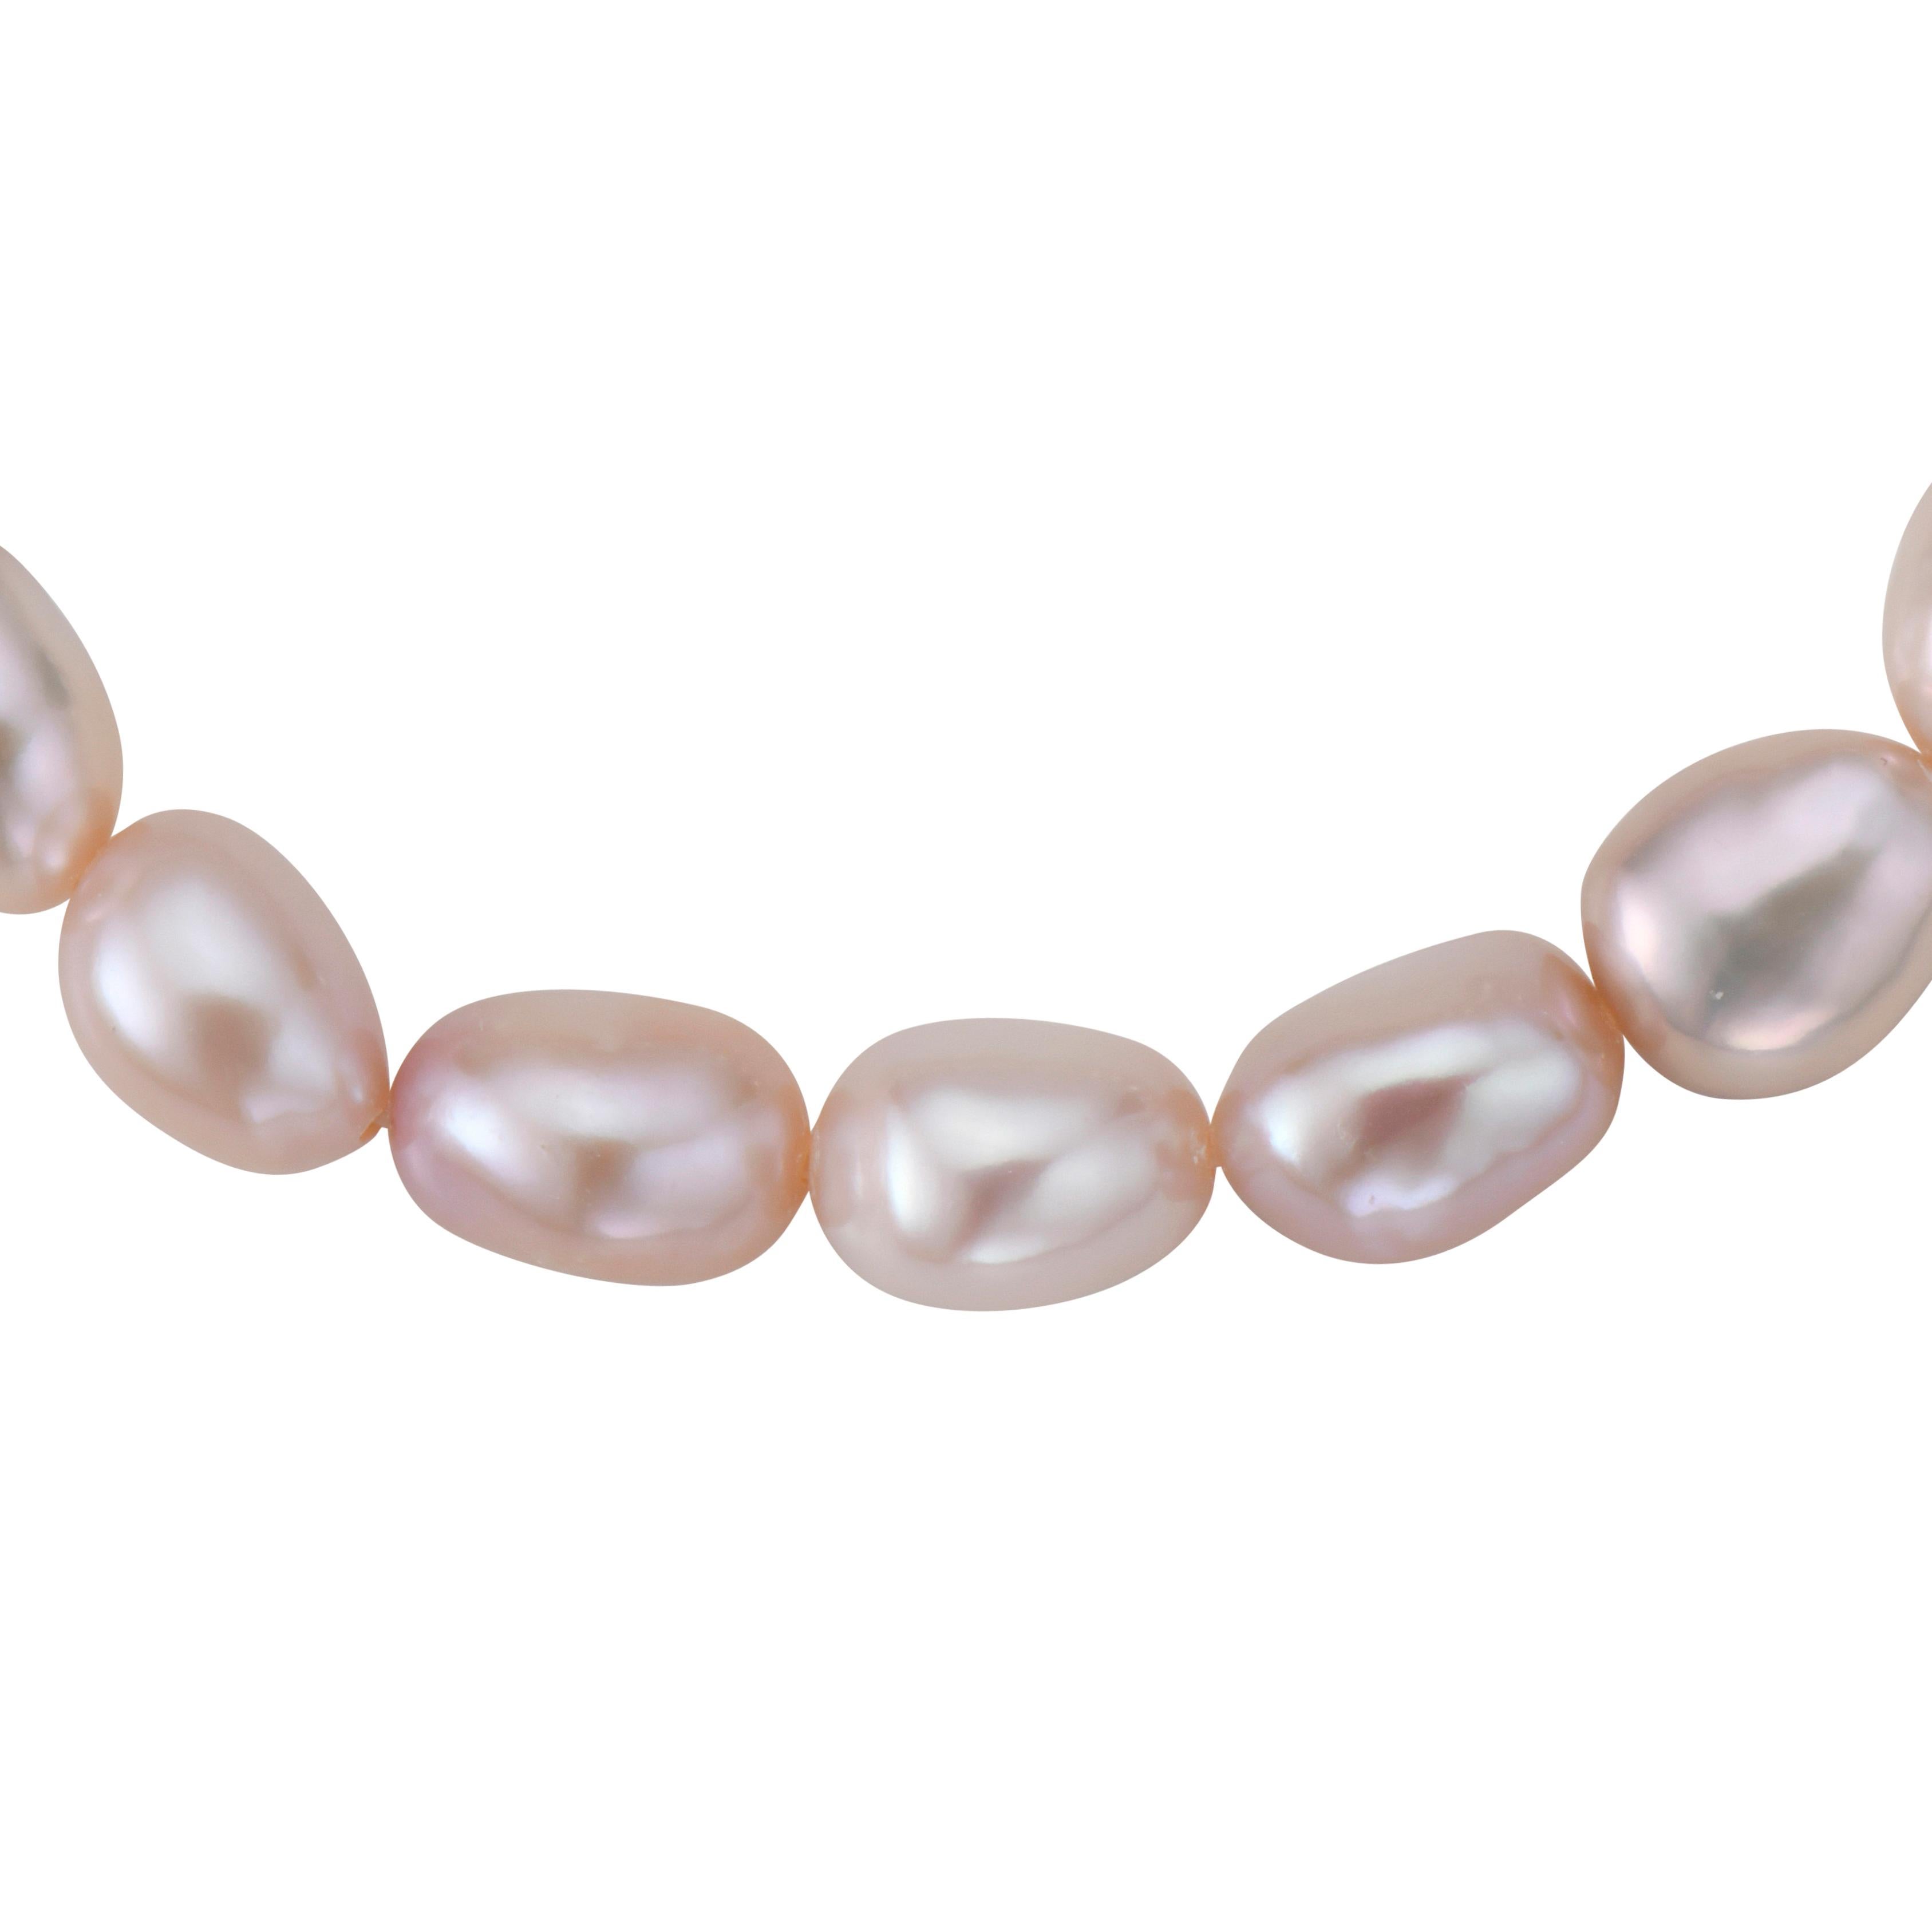 This bracelet features Cultured Freshwater Pink pearls. The pearls are 7-8mm and the bracelet is 8